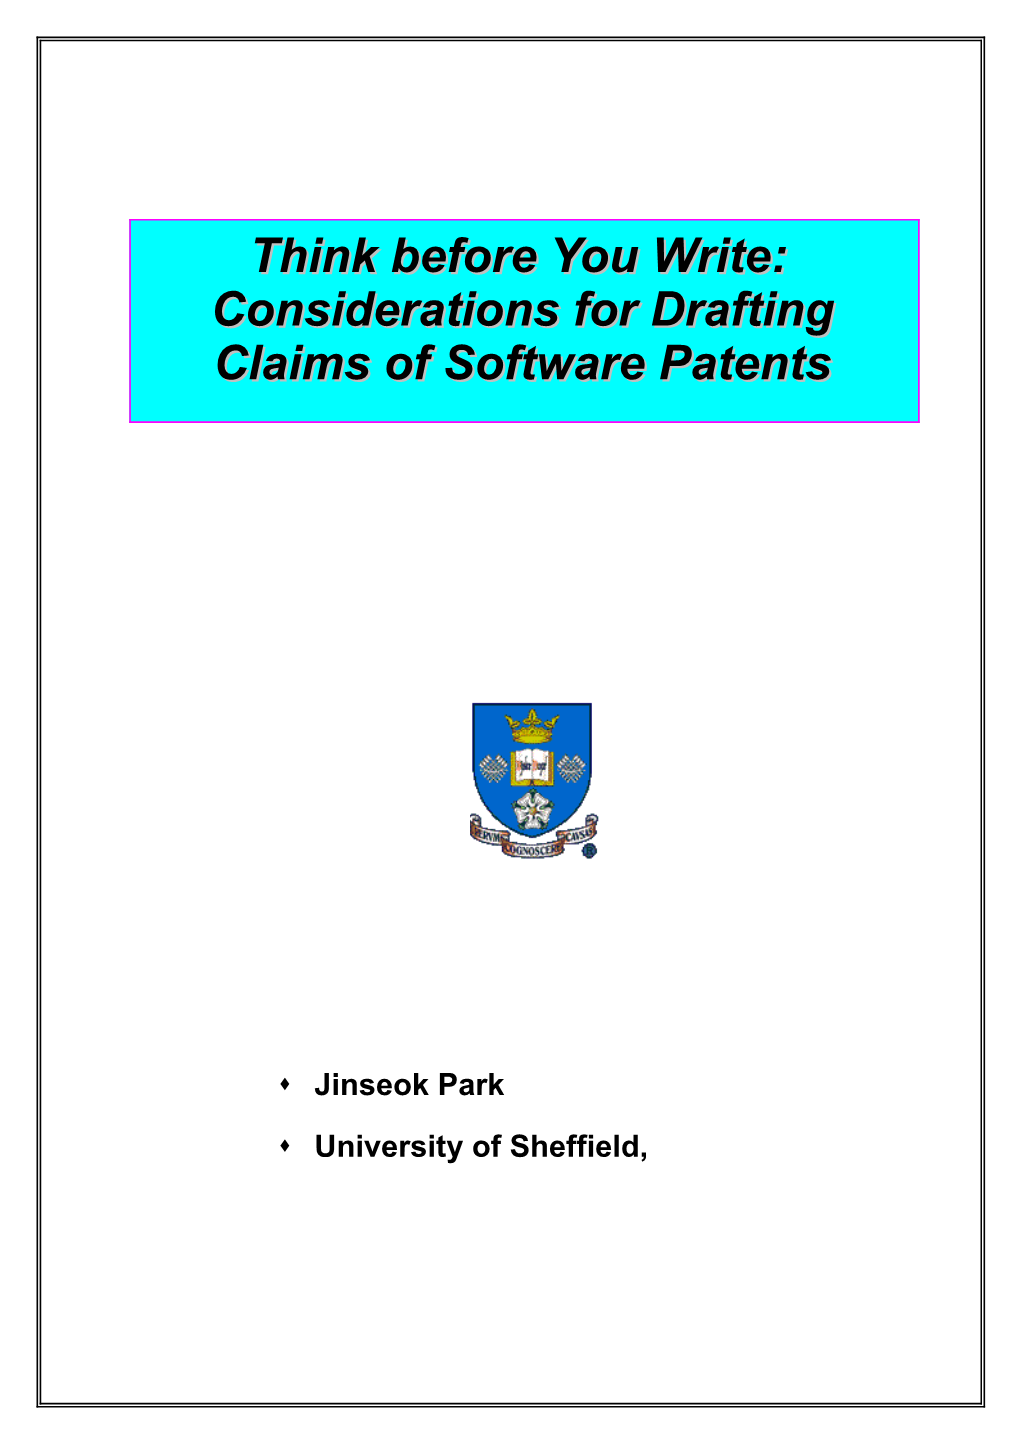 Think Before You Write - Considerations for Drafting Claims of Software Patents